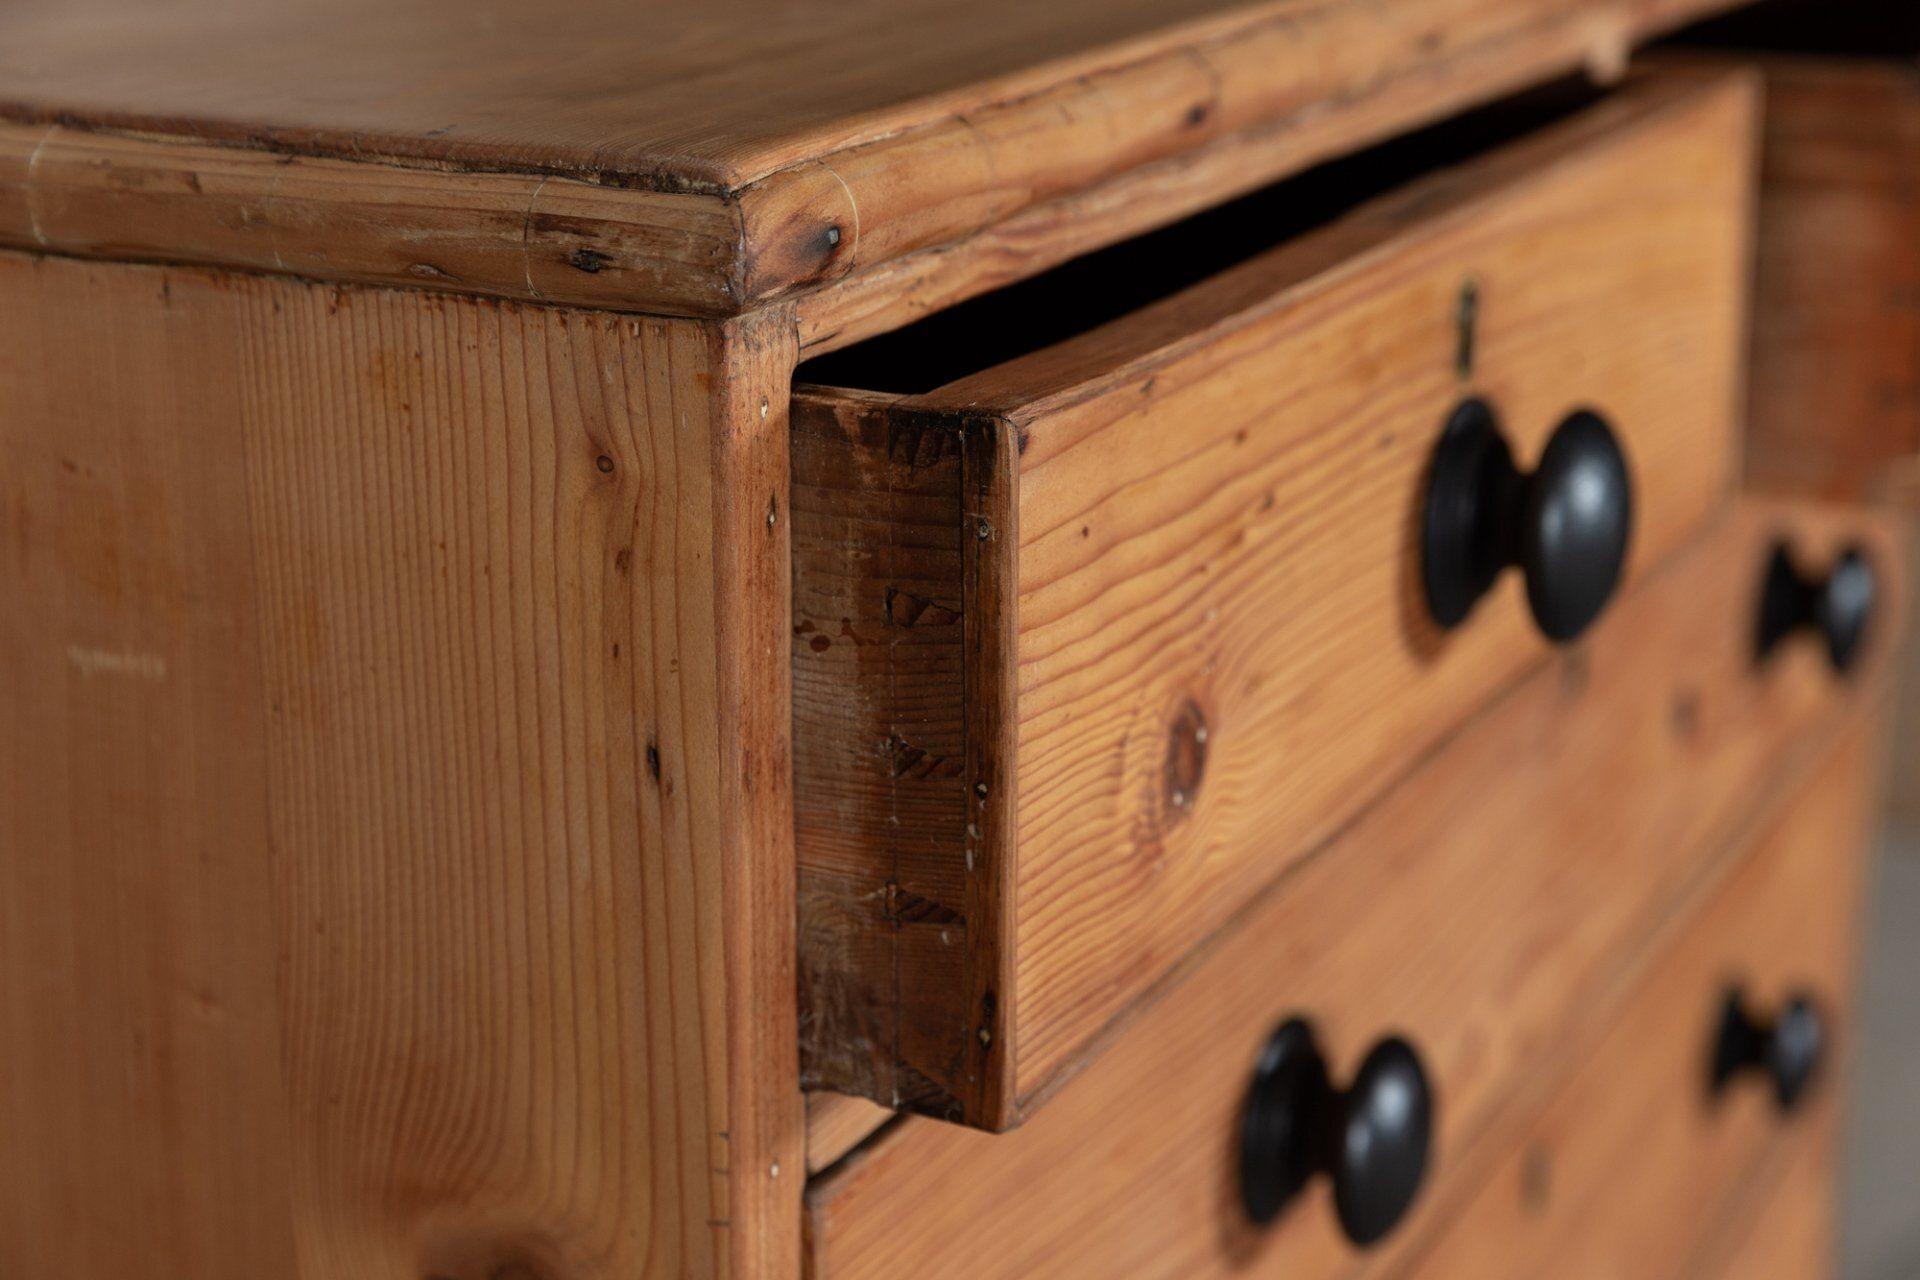 circa 1870
19th C large English pine faux bamboo chest drawers.
sku 1263
Measures: W98 x D55 x H115 cm.